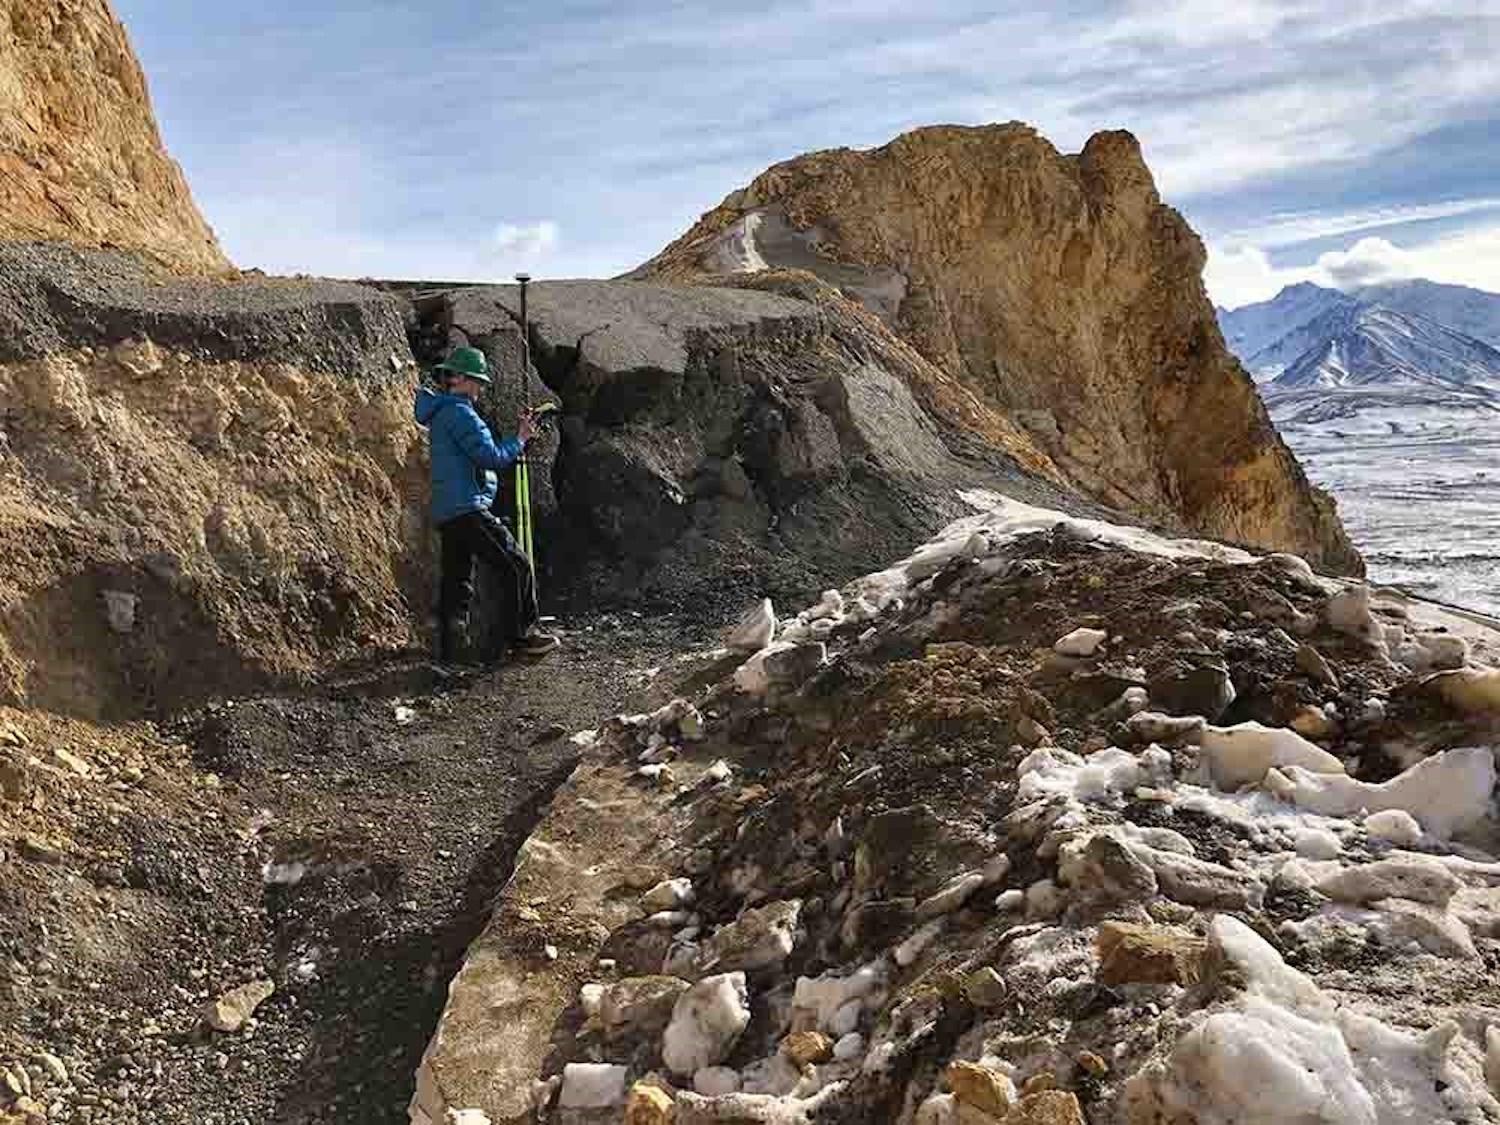 Denali staff collecting GPS data at the Pretty Rocks landslide near mile 45 of the Park Road on March 22, 2019. The survey rod she is holding is 6.5 feet tall, is placed near centerline of the road and shows the amount of displacement since September 14, 